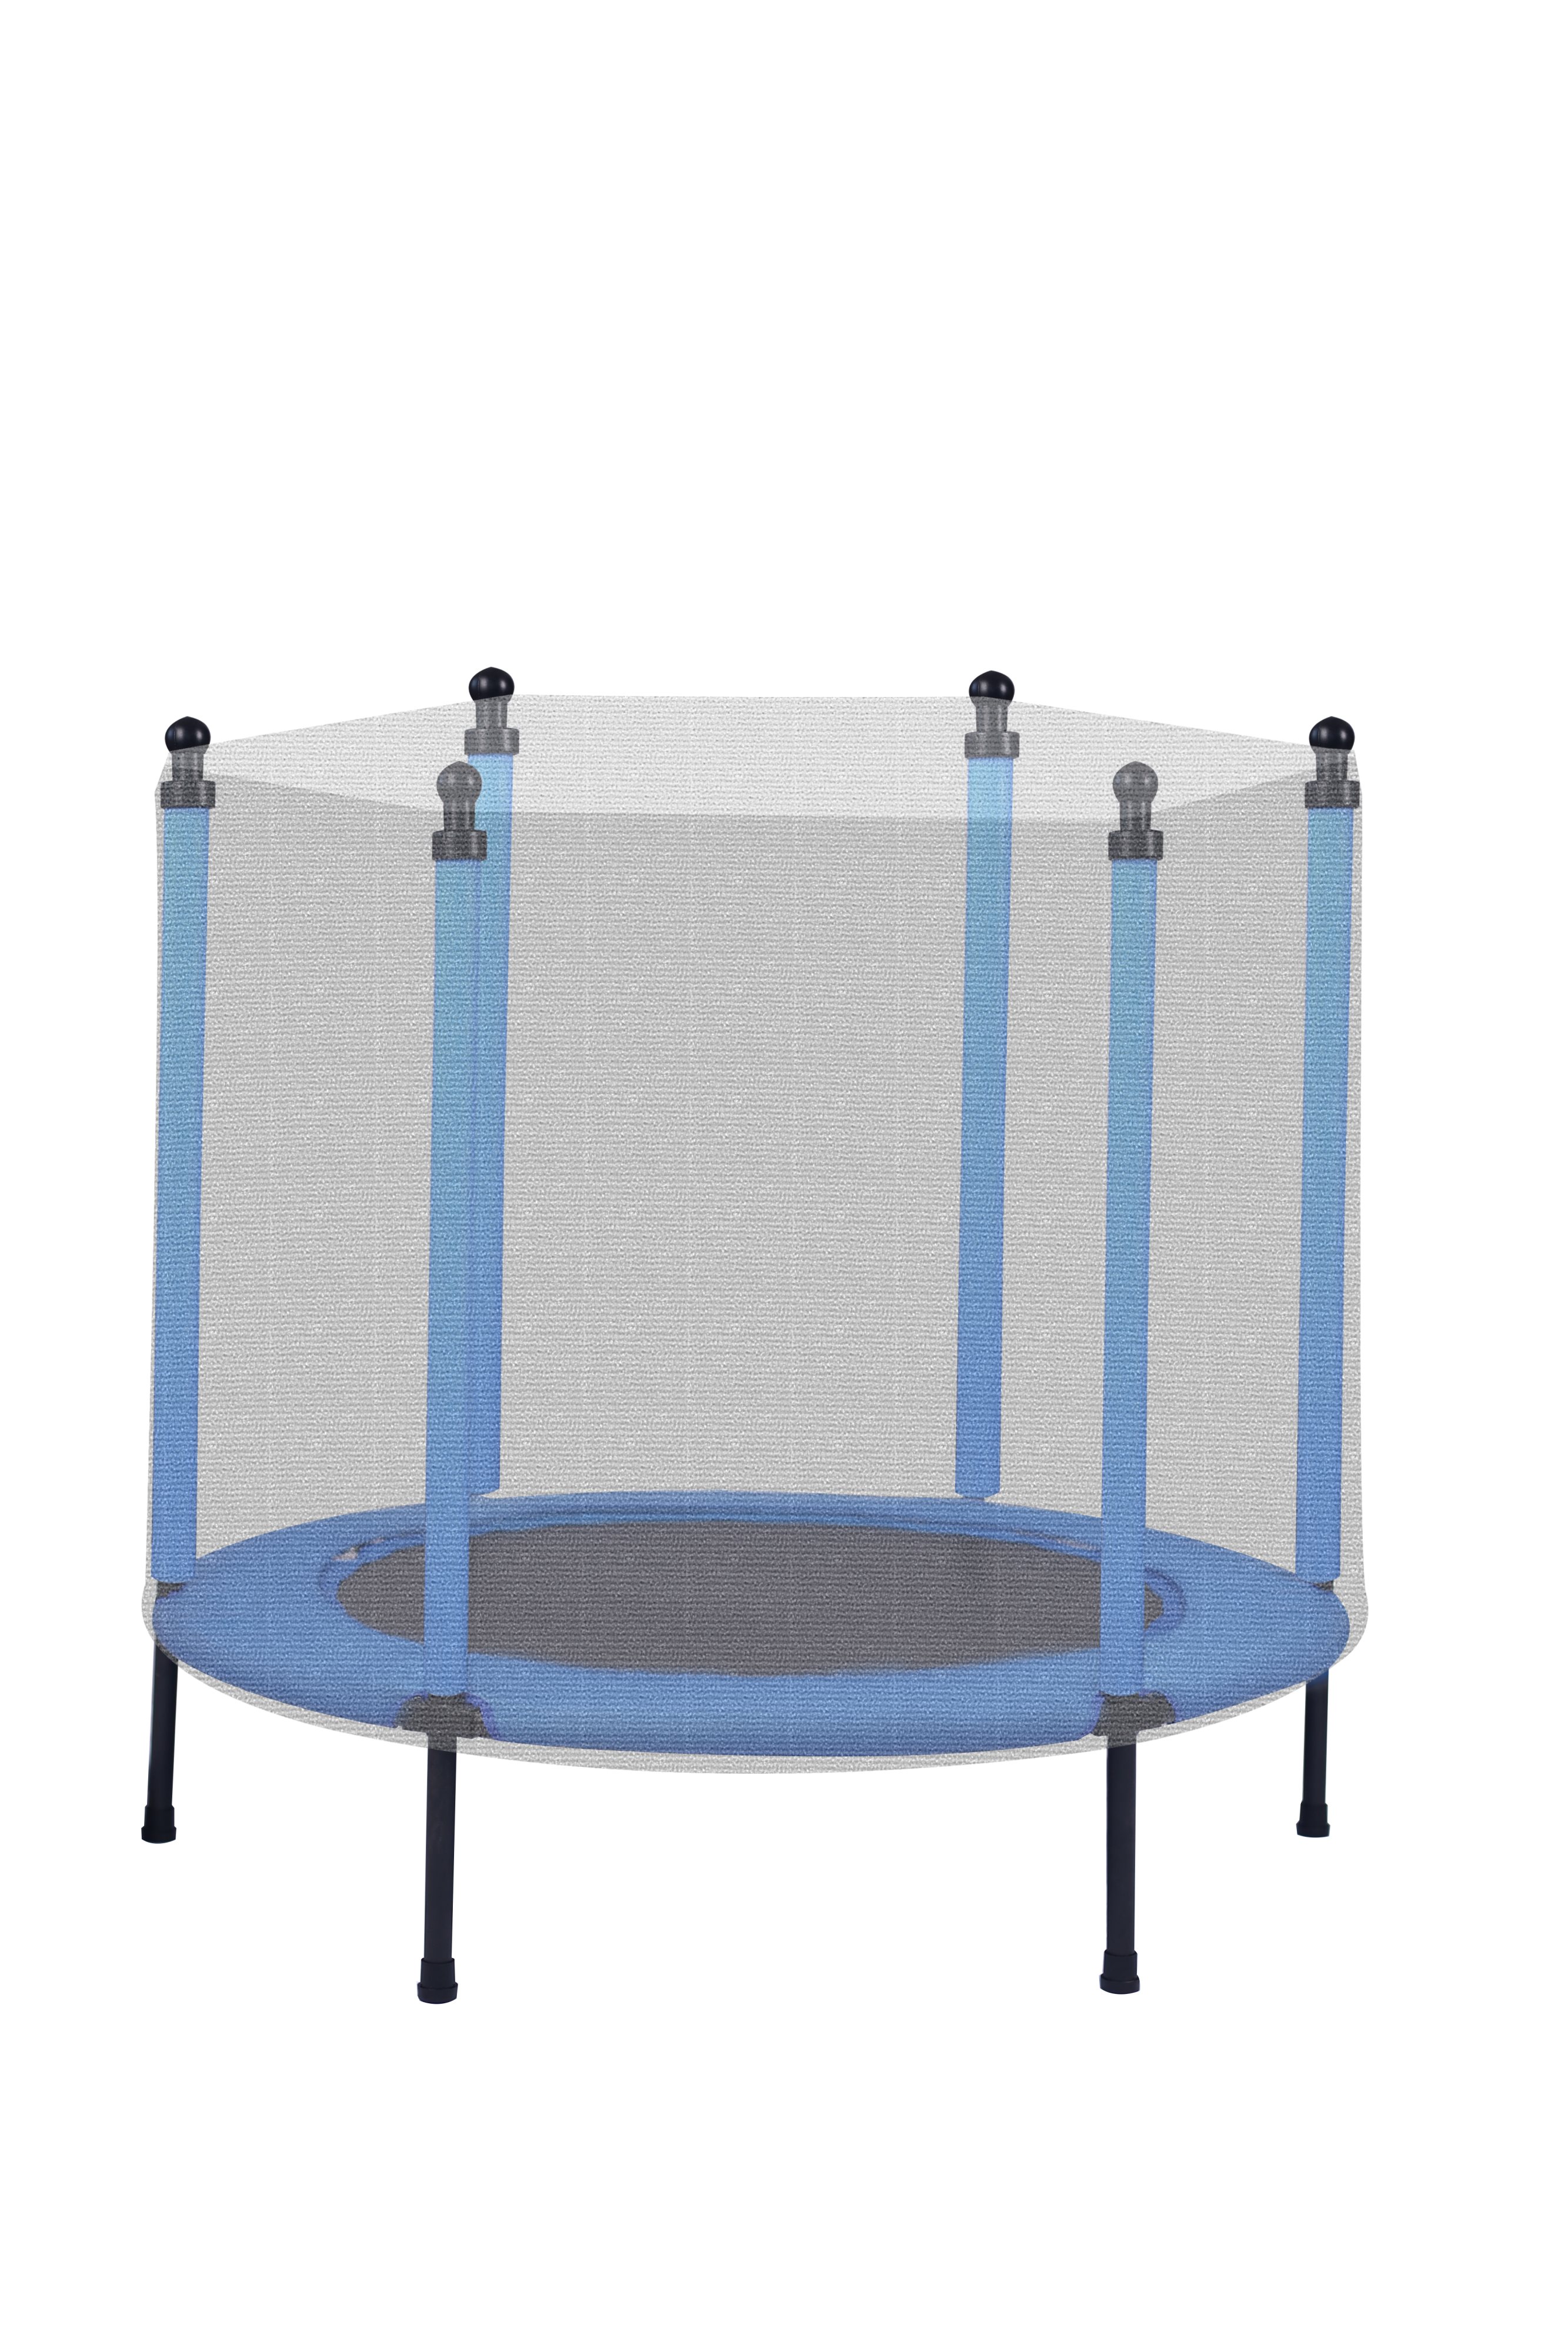 Kids Trampoline for Toddlers with Net, 48in Toddler Trampoline with Enclosure, Mini Trampoeline Indoor Blue-CASAINC